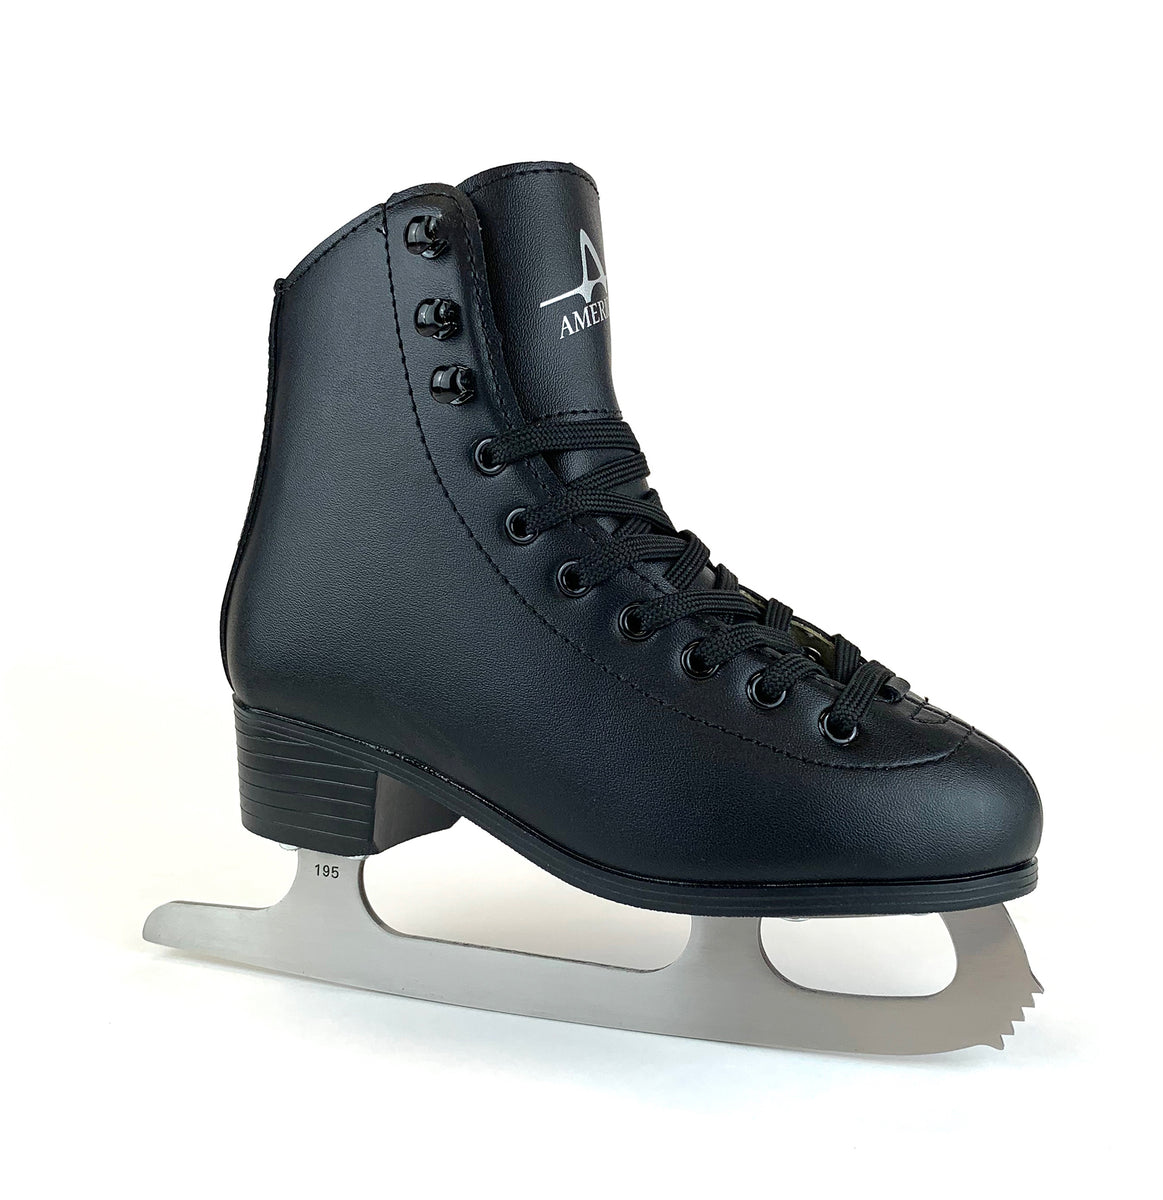 Boys Tricot Lined Figure Skate